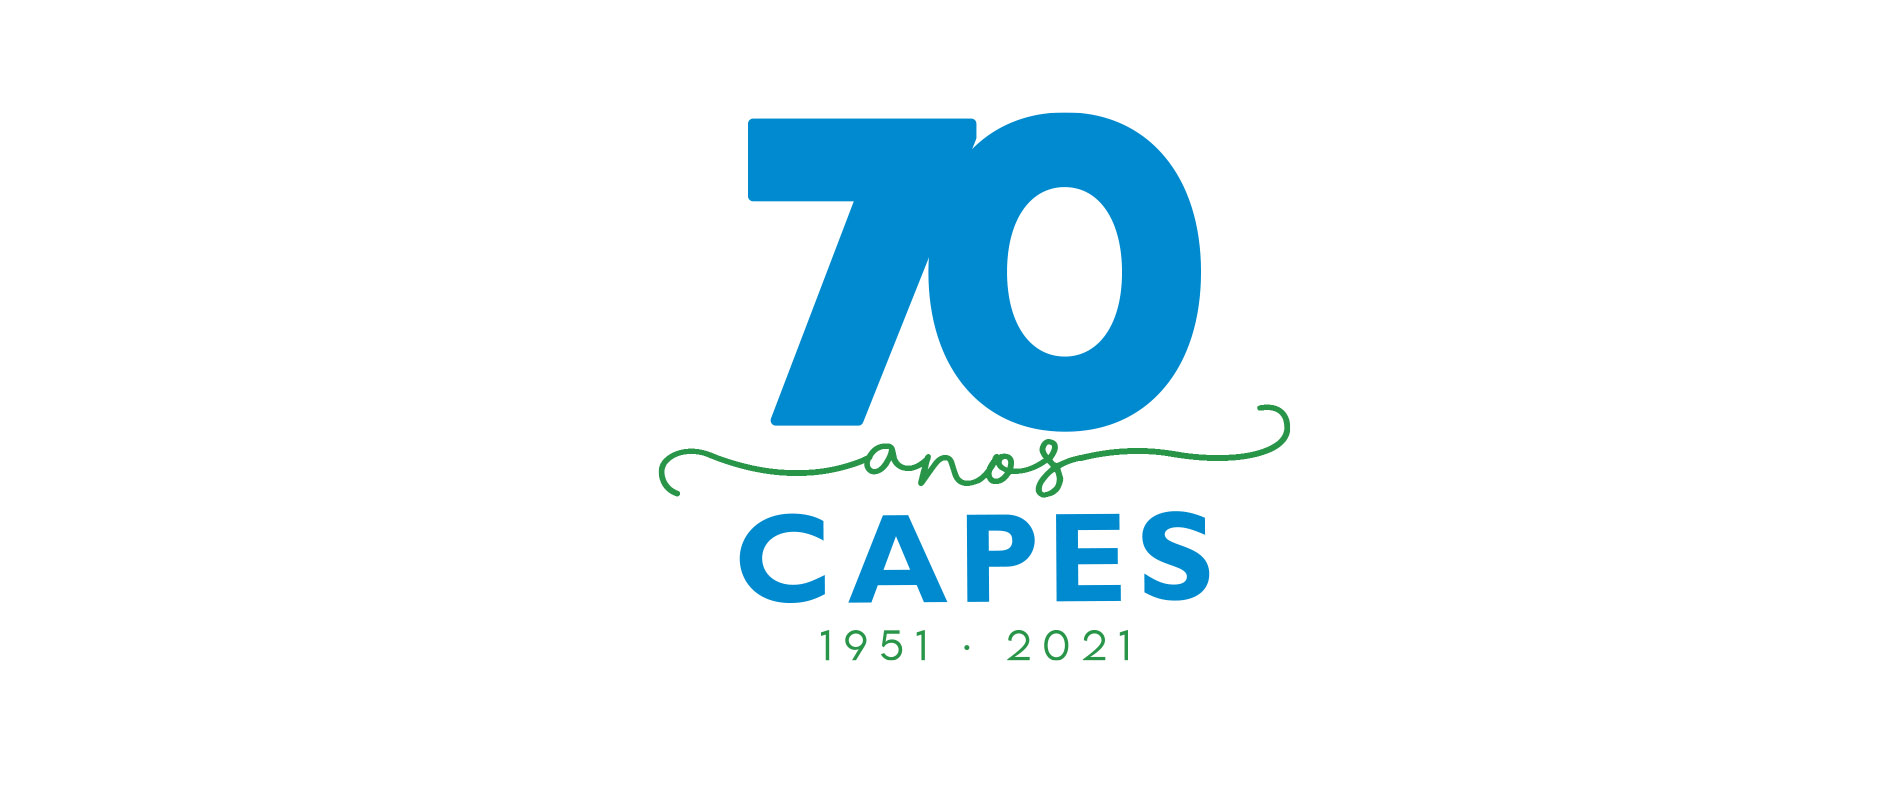 CAPES 70 ANOS